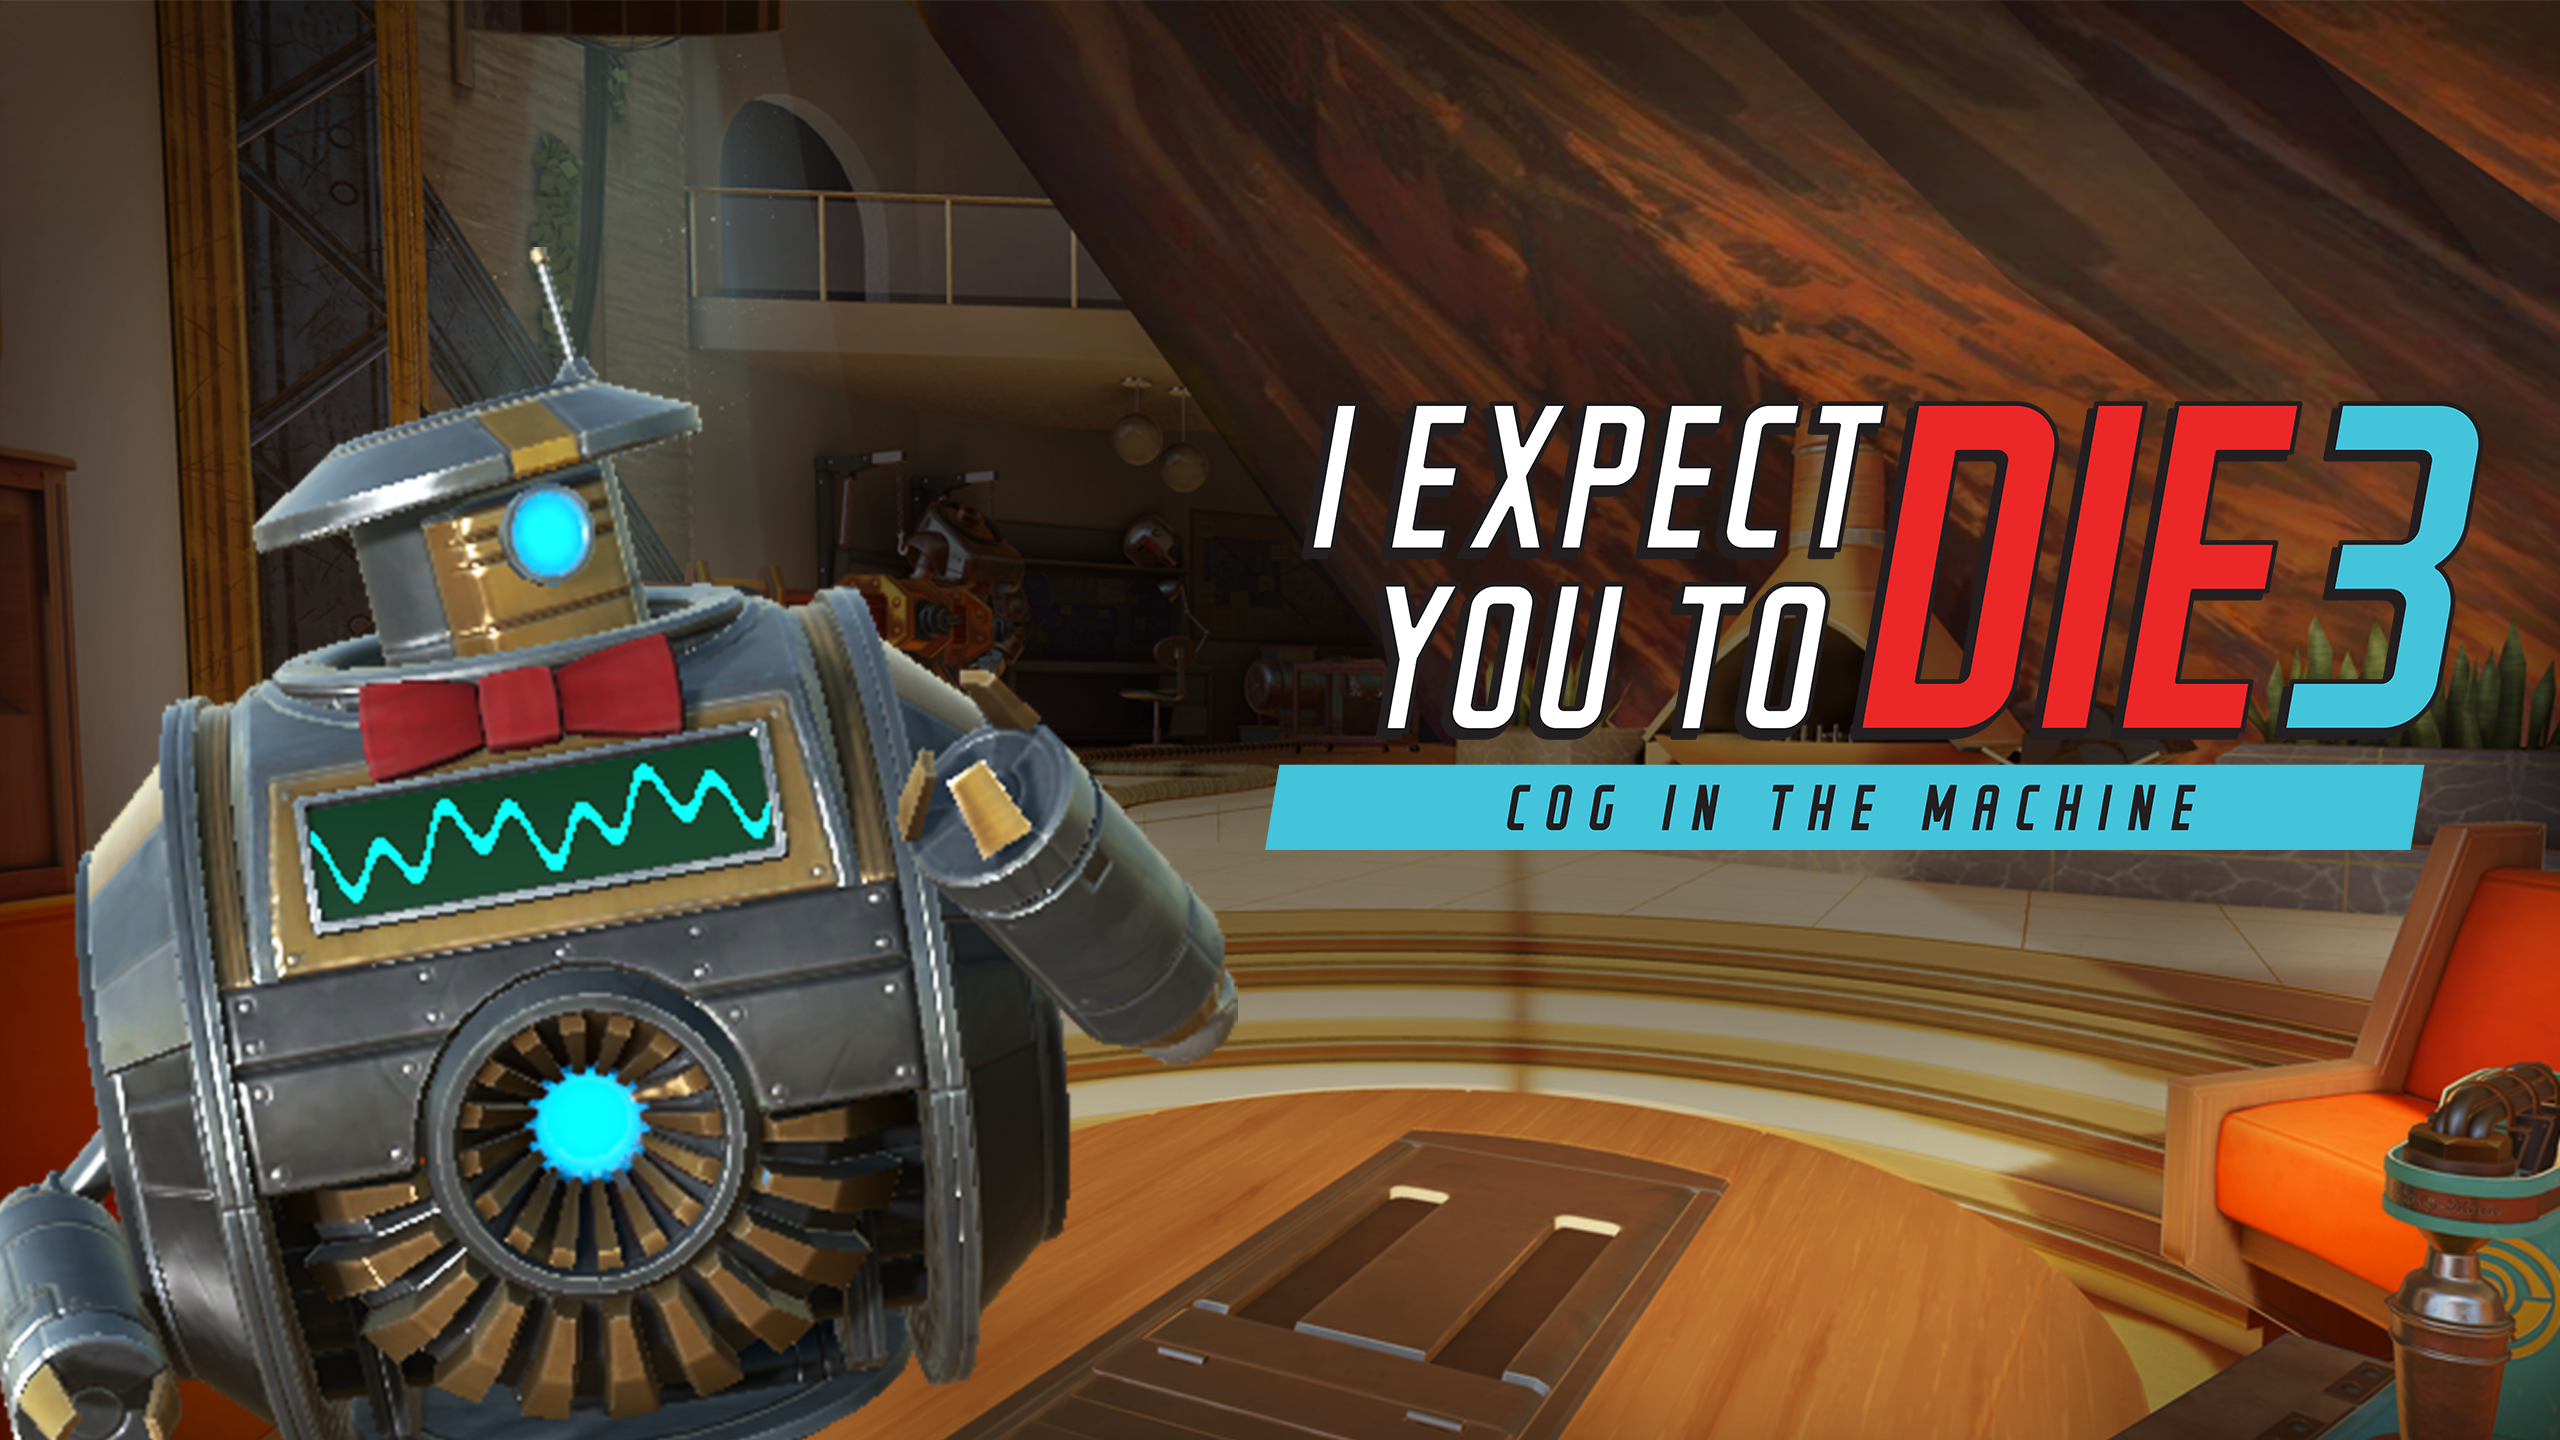 I Expect You To Die 3 SteamVR Launch, Robot Antics Trailer Reveal, and More!